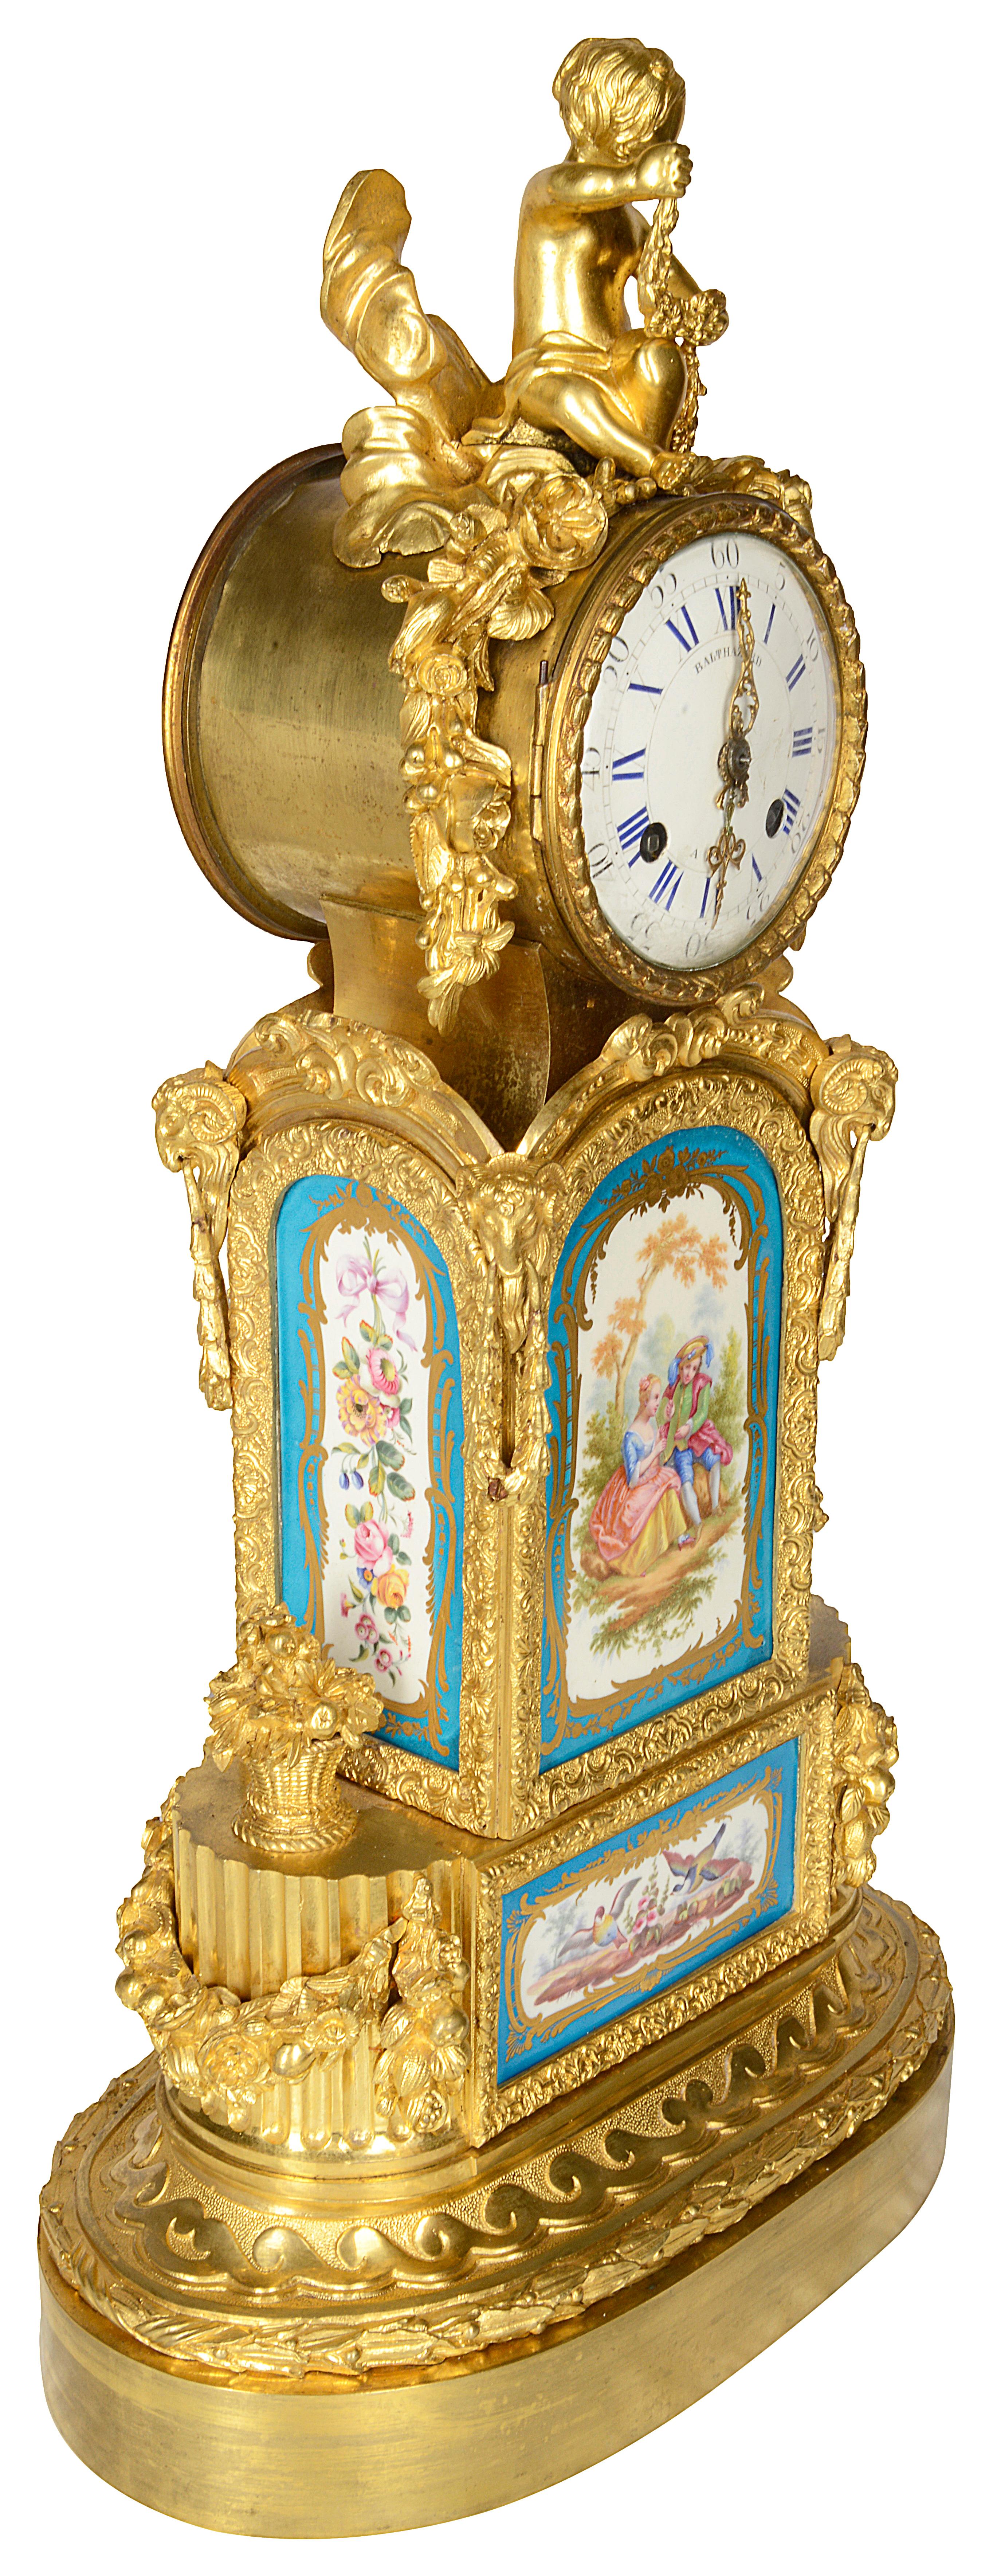 French 19th Century Sevres Style Gilded Ormolu Mantel Clock For Sale